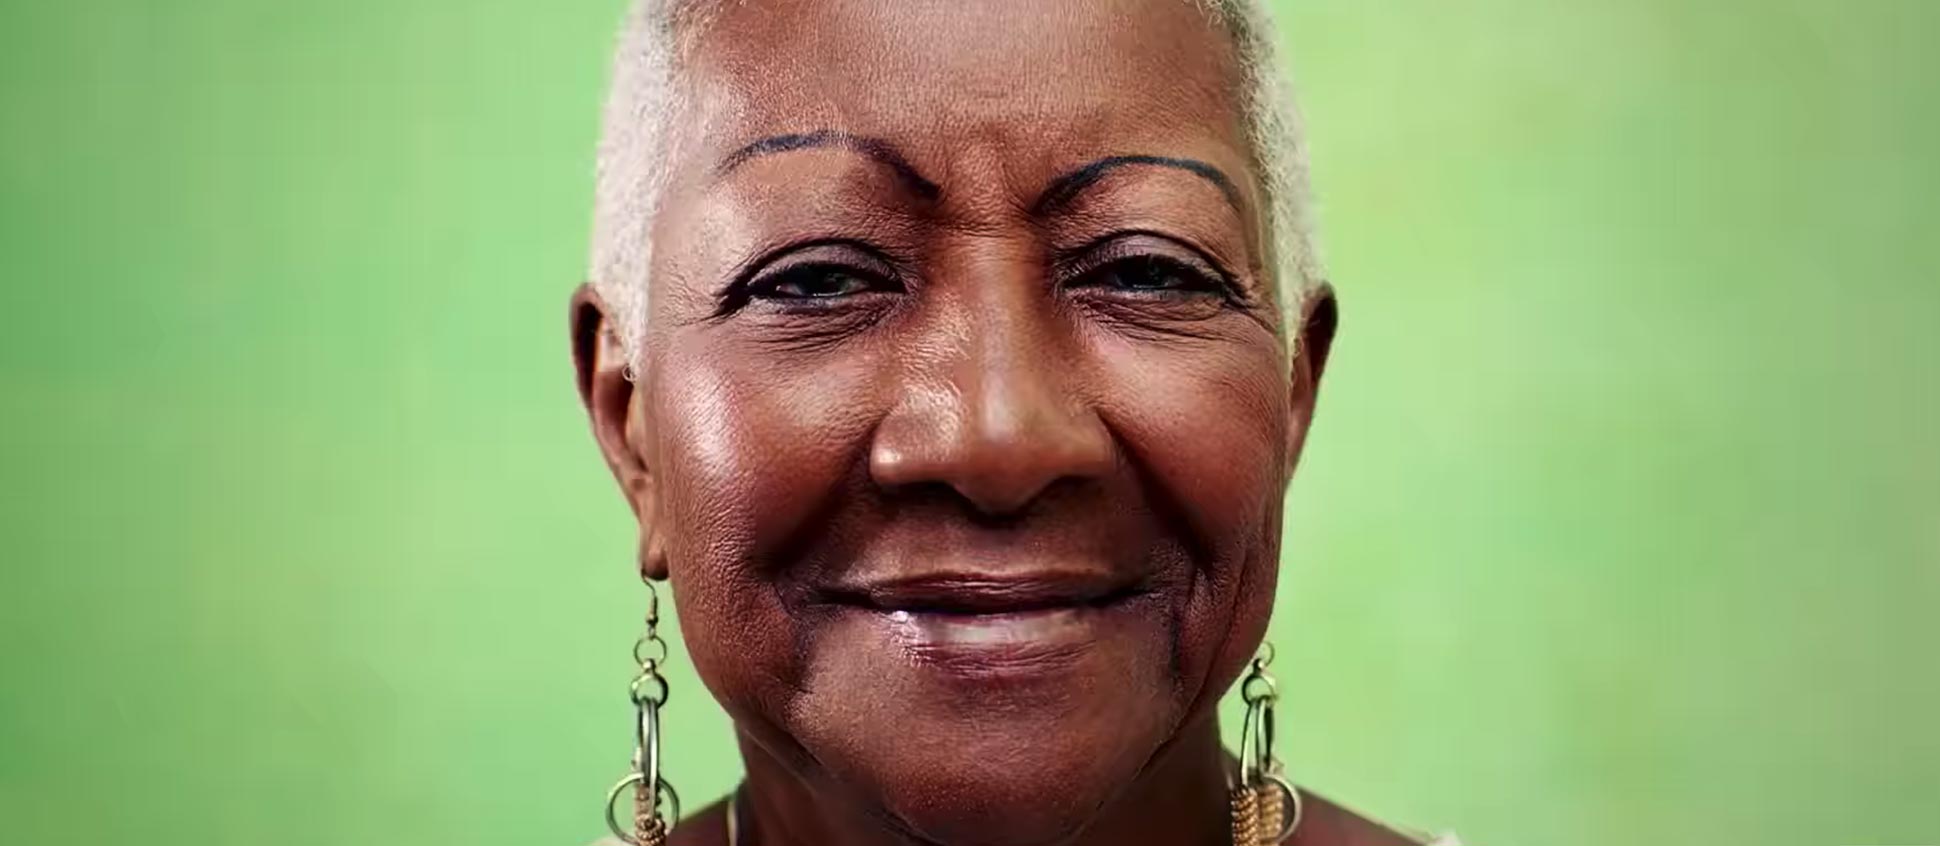 Image of an older adult Black woman